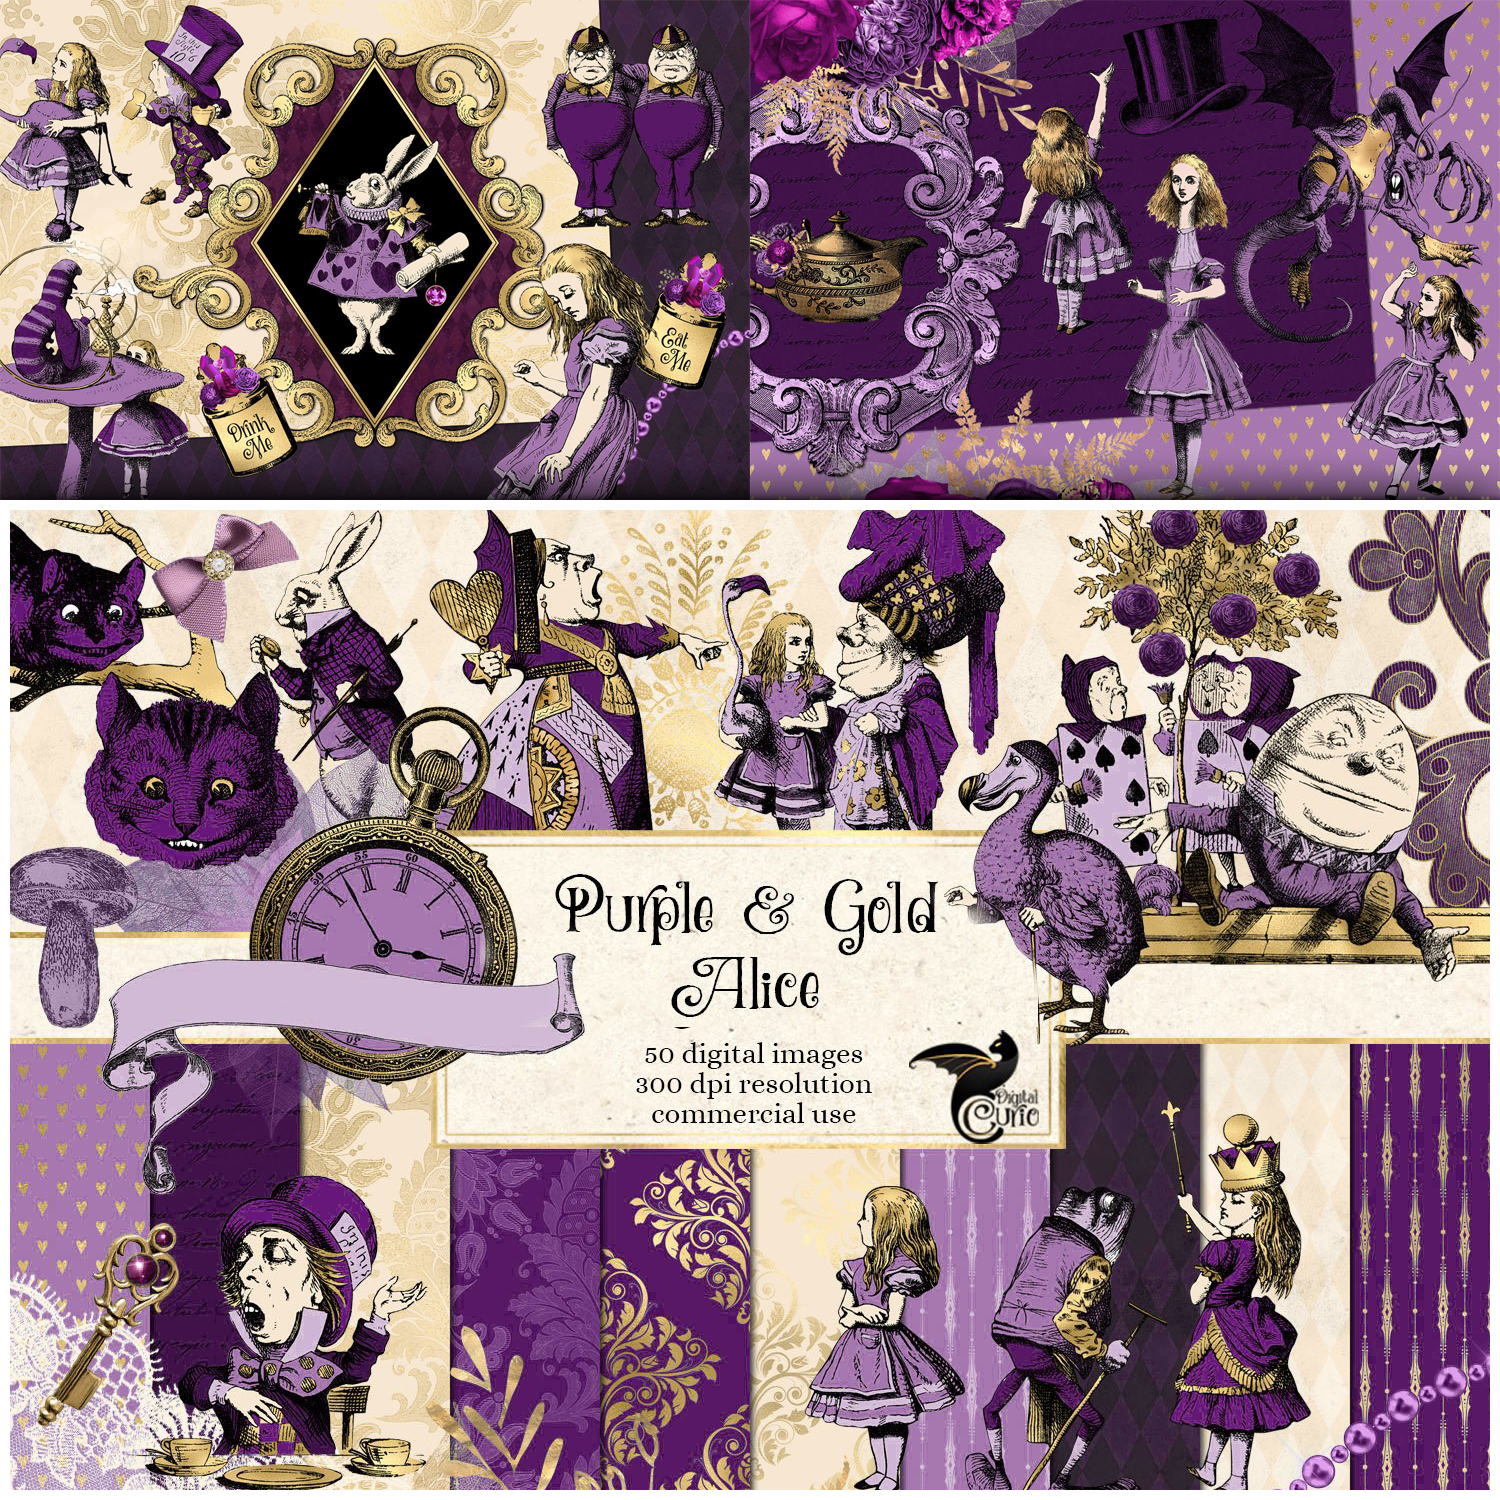 Prints of purple and gold alice in wonderland graphics.